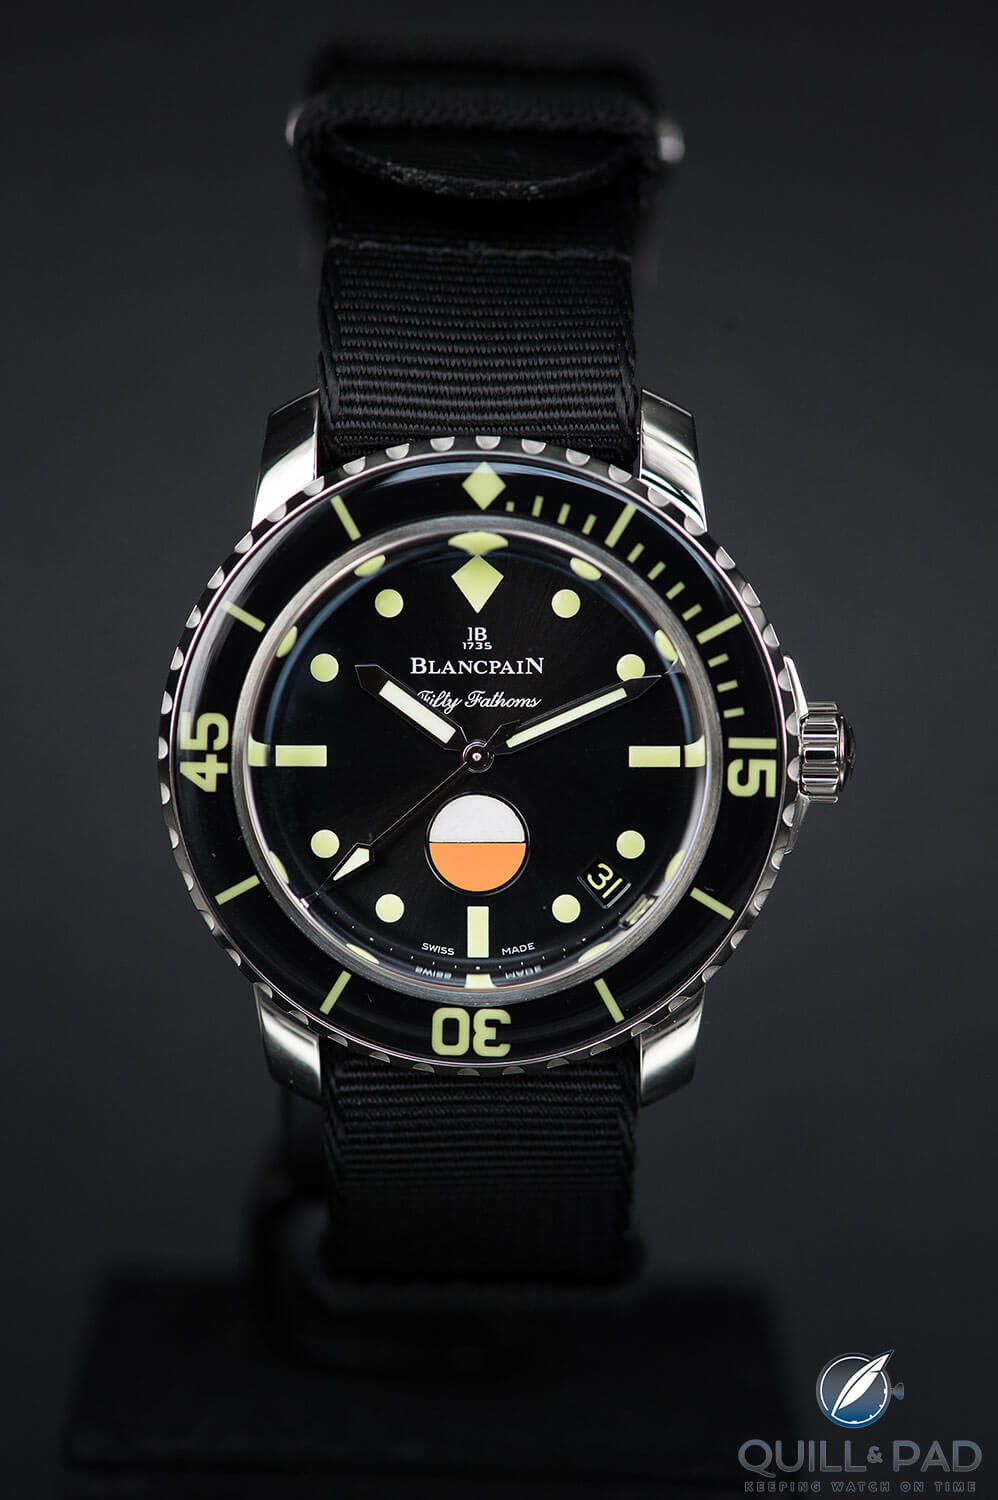 Blancpain Tribute to Fifty Fathoms MIL-Spec